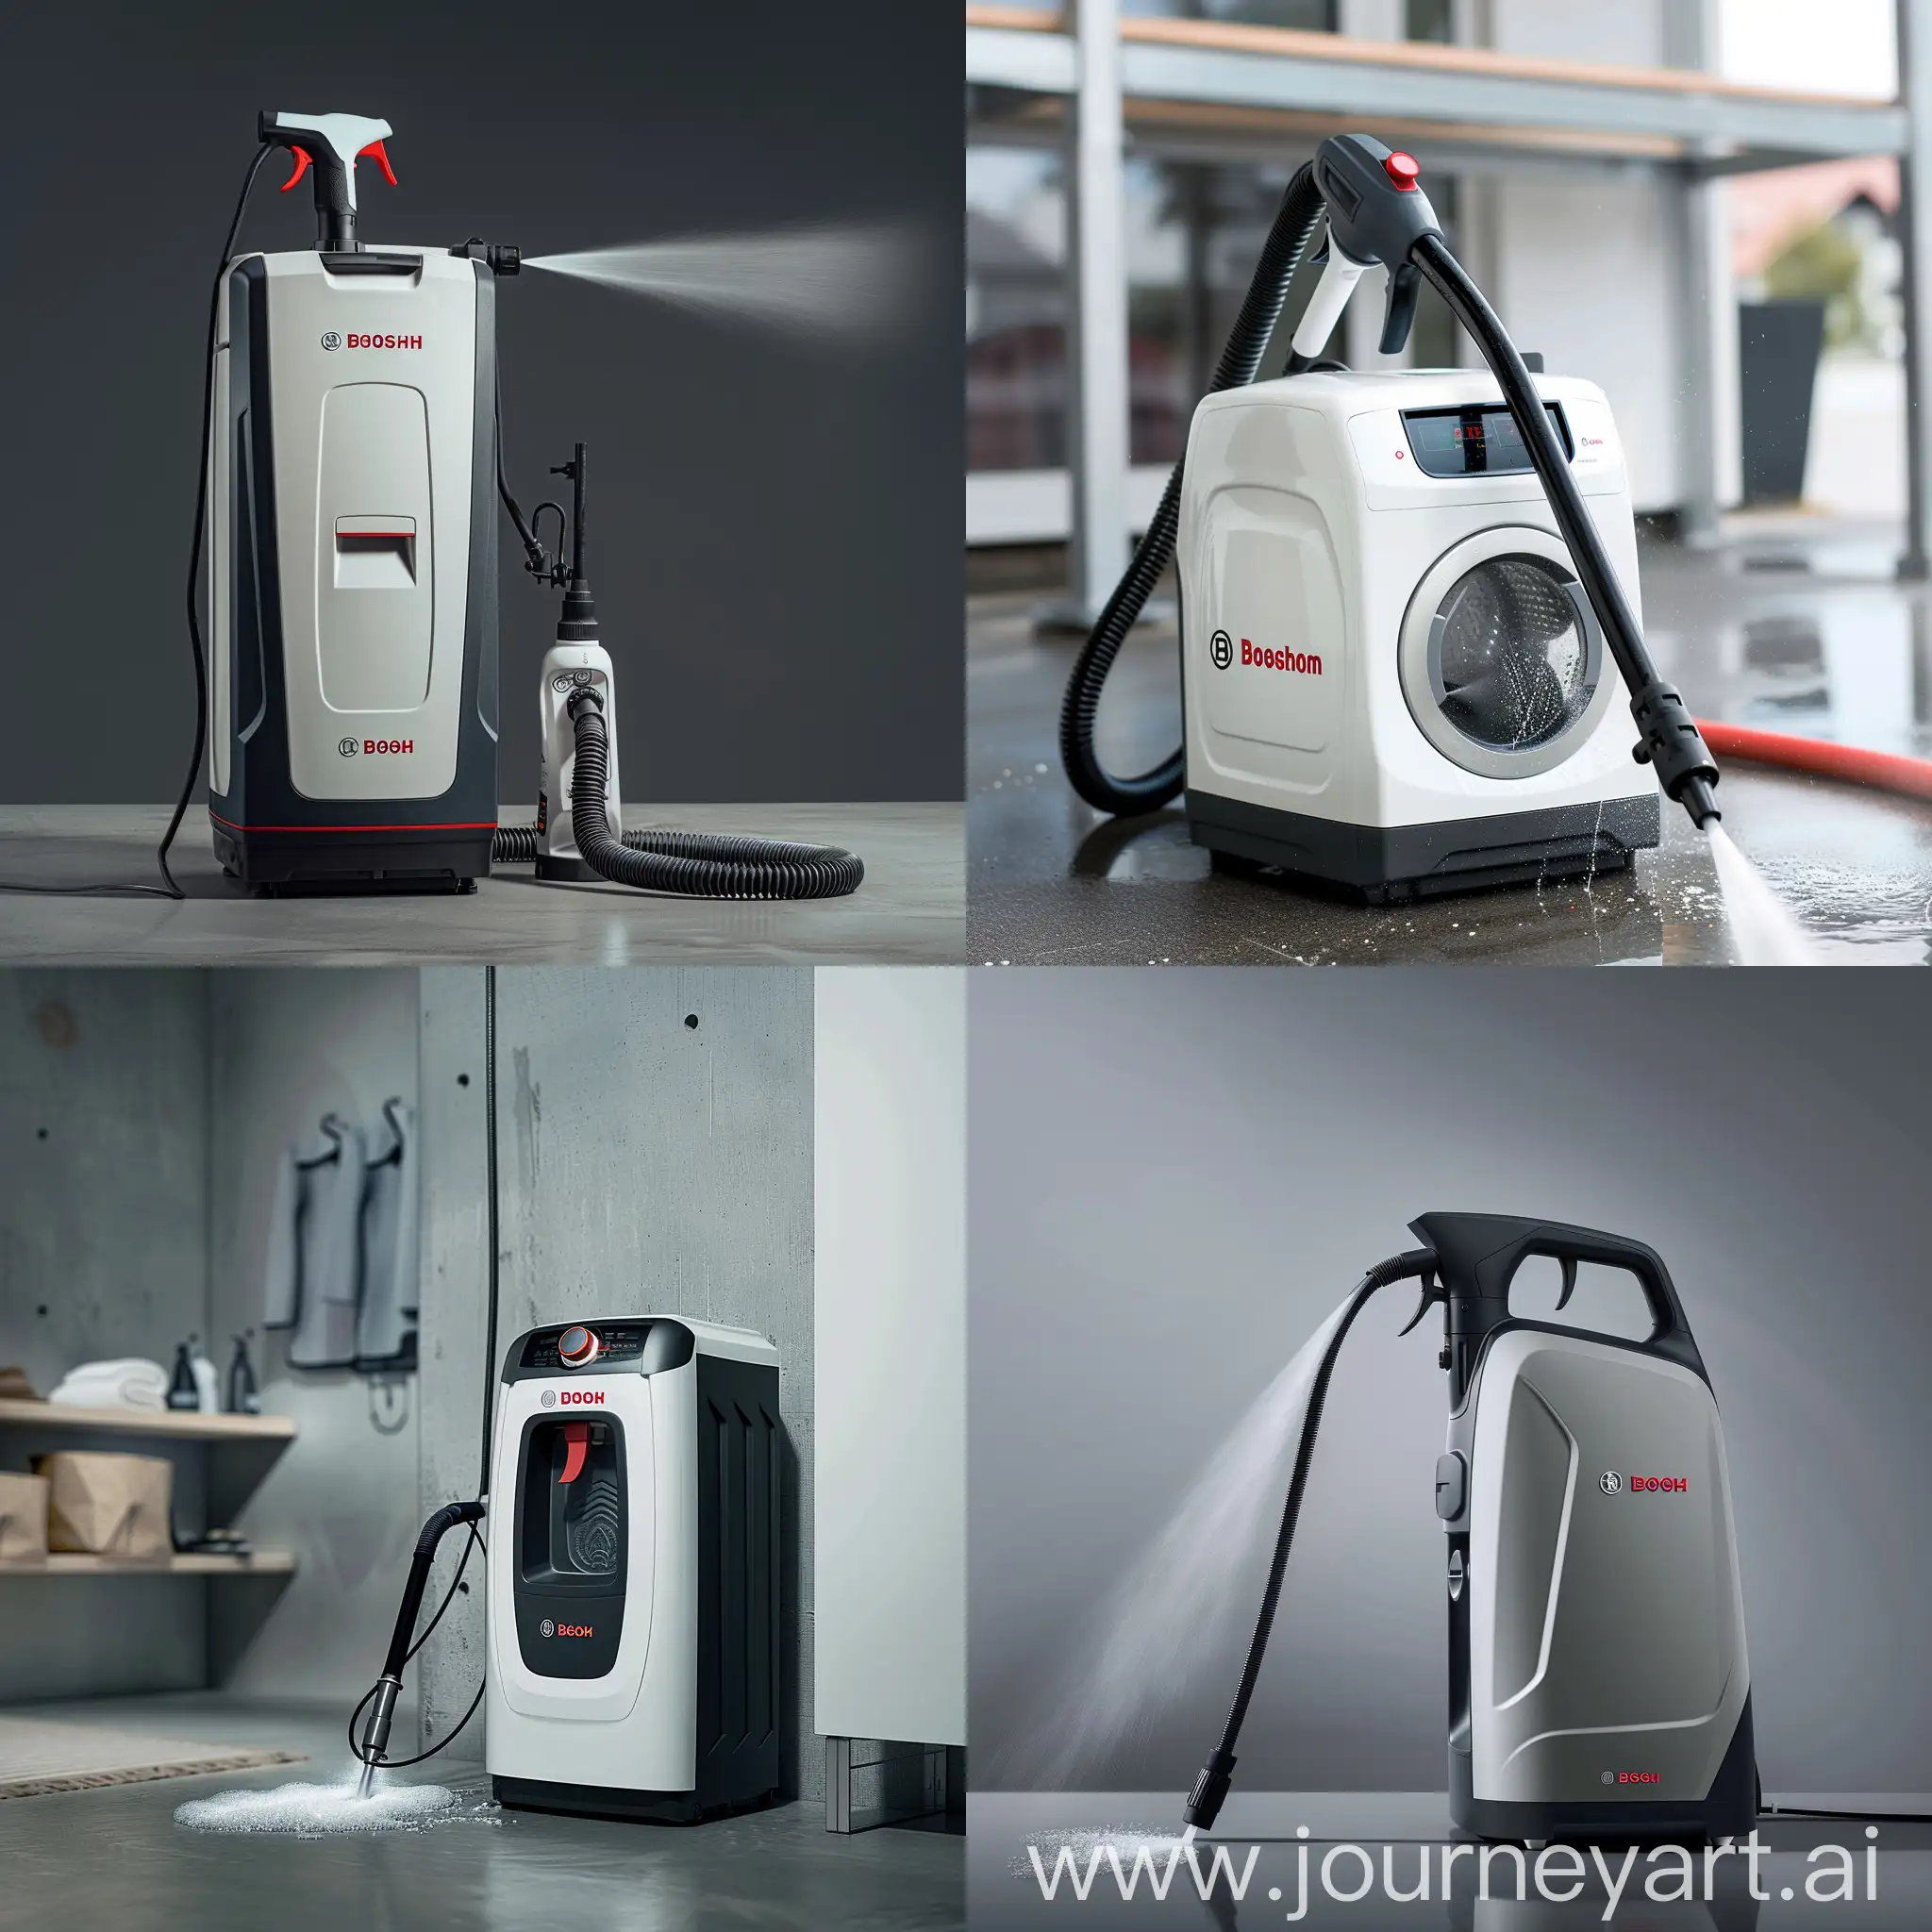 Design an image for a battery-powered pressure washer in the distinctive style of Bosch Professional, emphasizing both power and mobility.